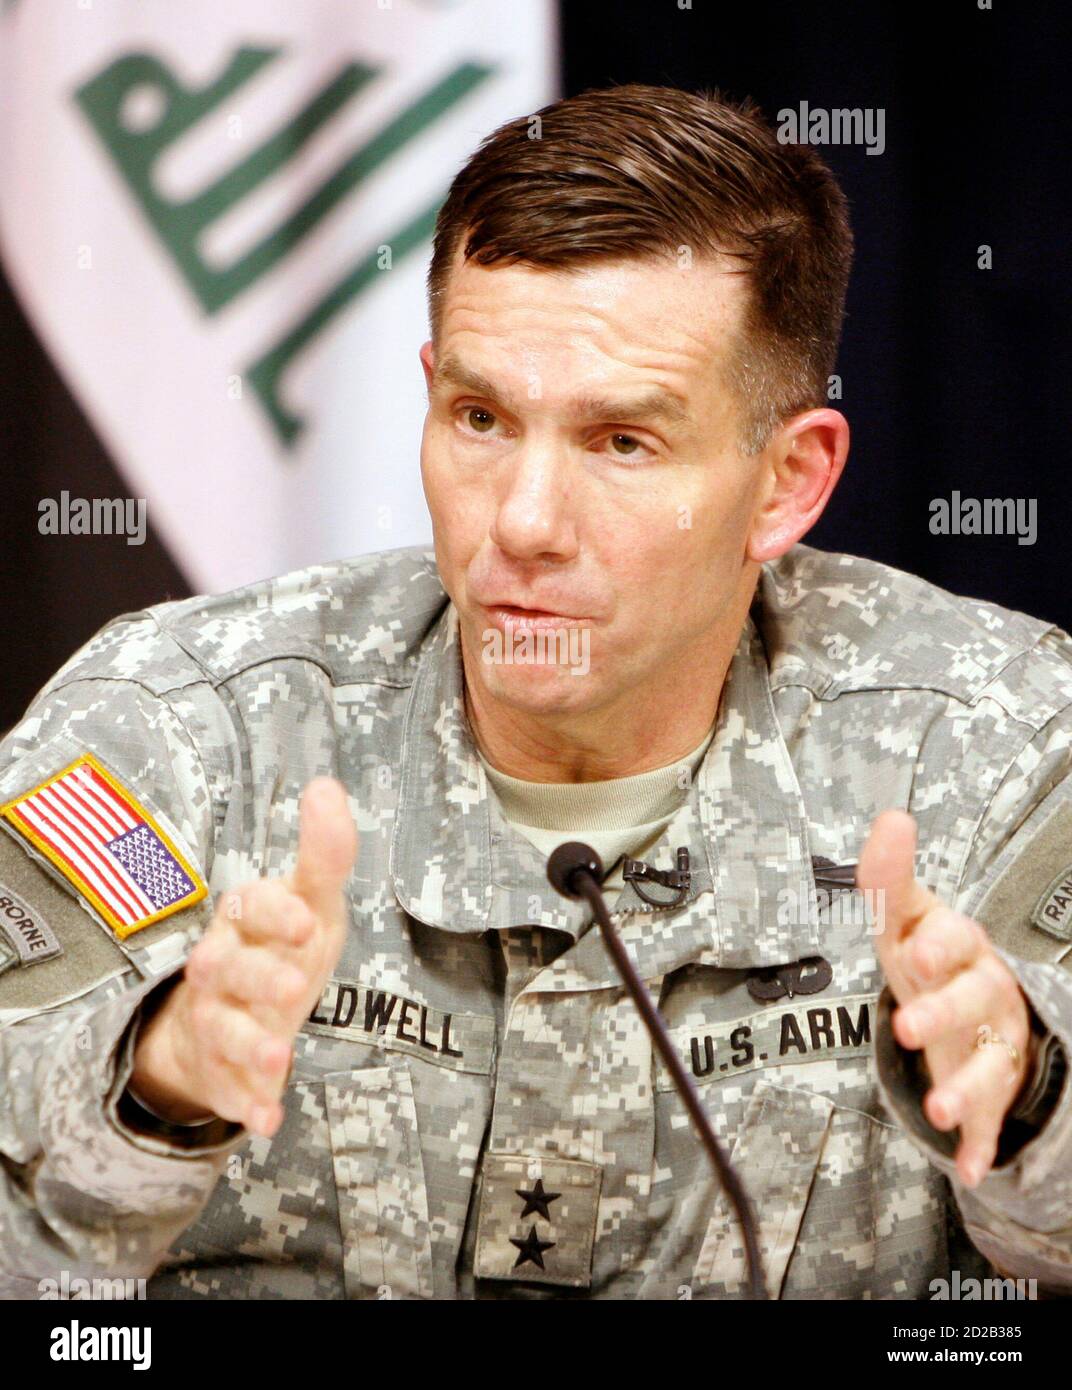 Major-General William B. Caldwell IV, Multi-National Force-Iraq Spokesman, speaks to the media in a joint media conference with  Brigadier-General C. Mark Gurganus, Commanding General, Ground Combat Element, Multi-National Force-West, at the heavily fortified Green Zone area in Baghdad May 16, 2007. REUTERS/Ali Abbas/Pool  (IRAQ) Stock Photo